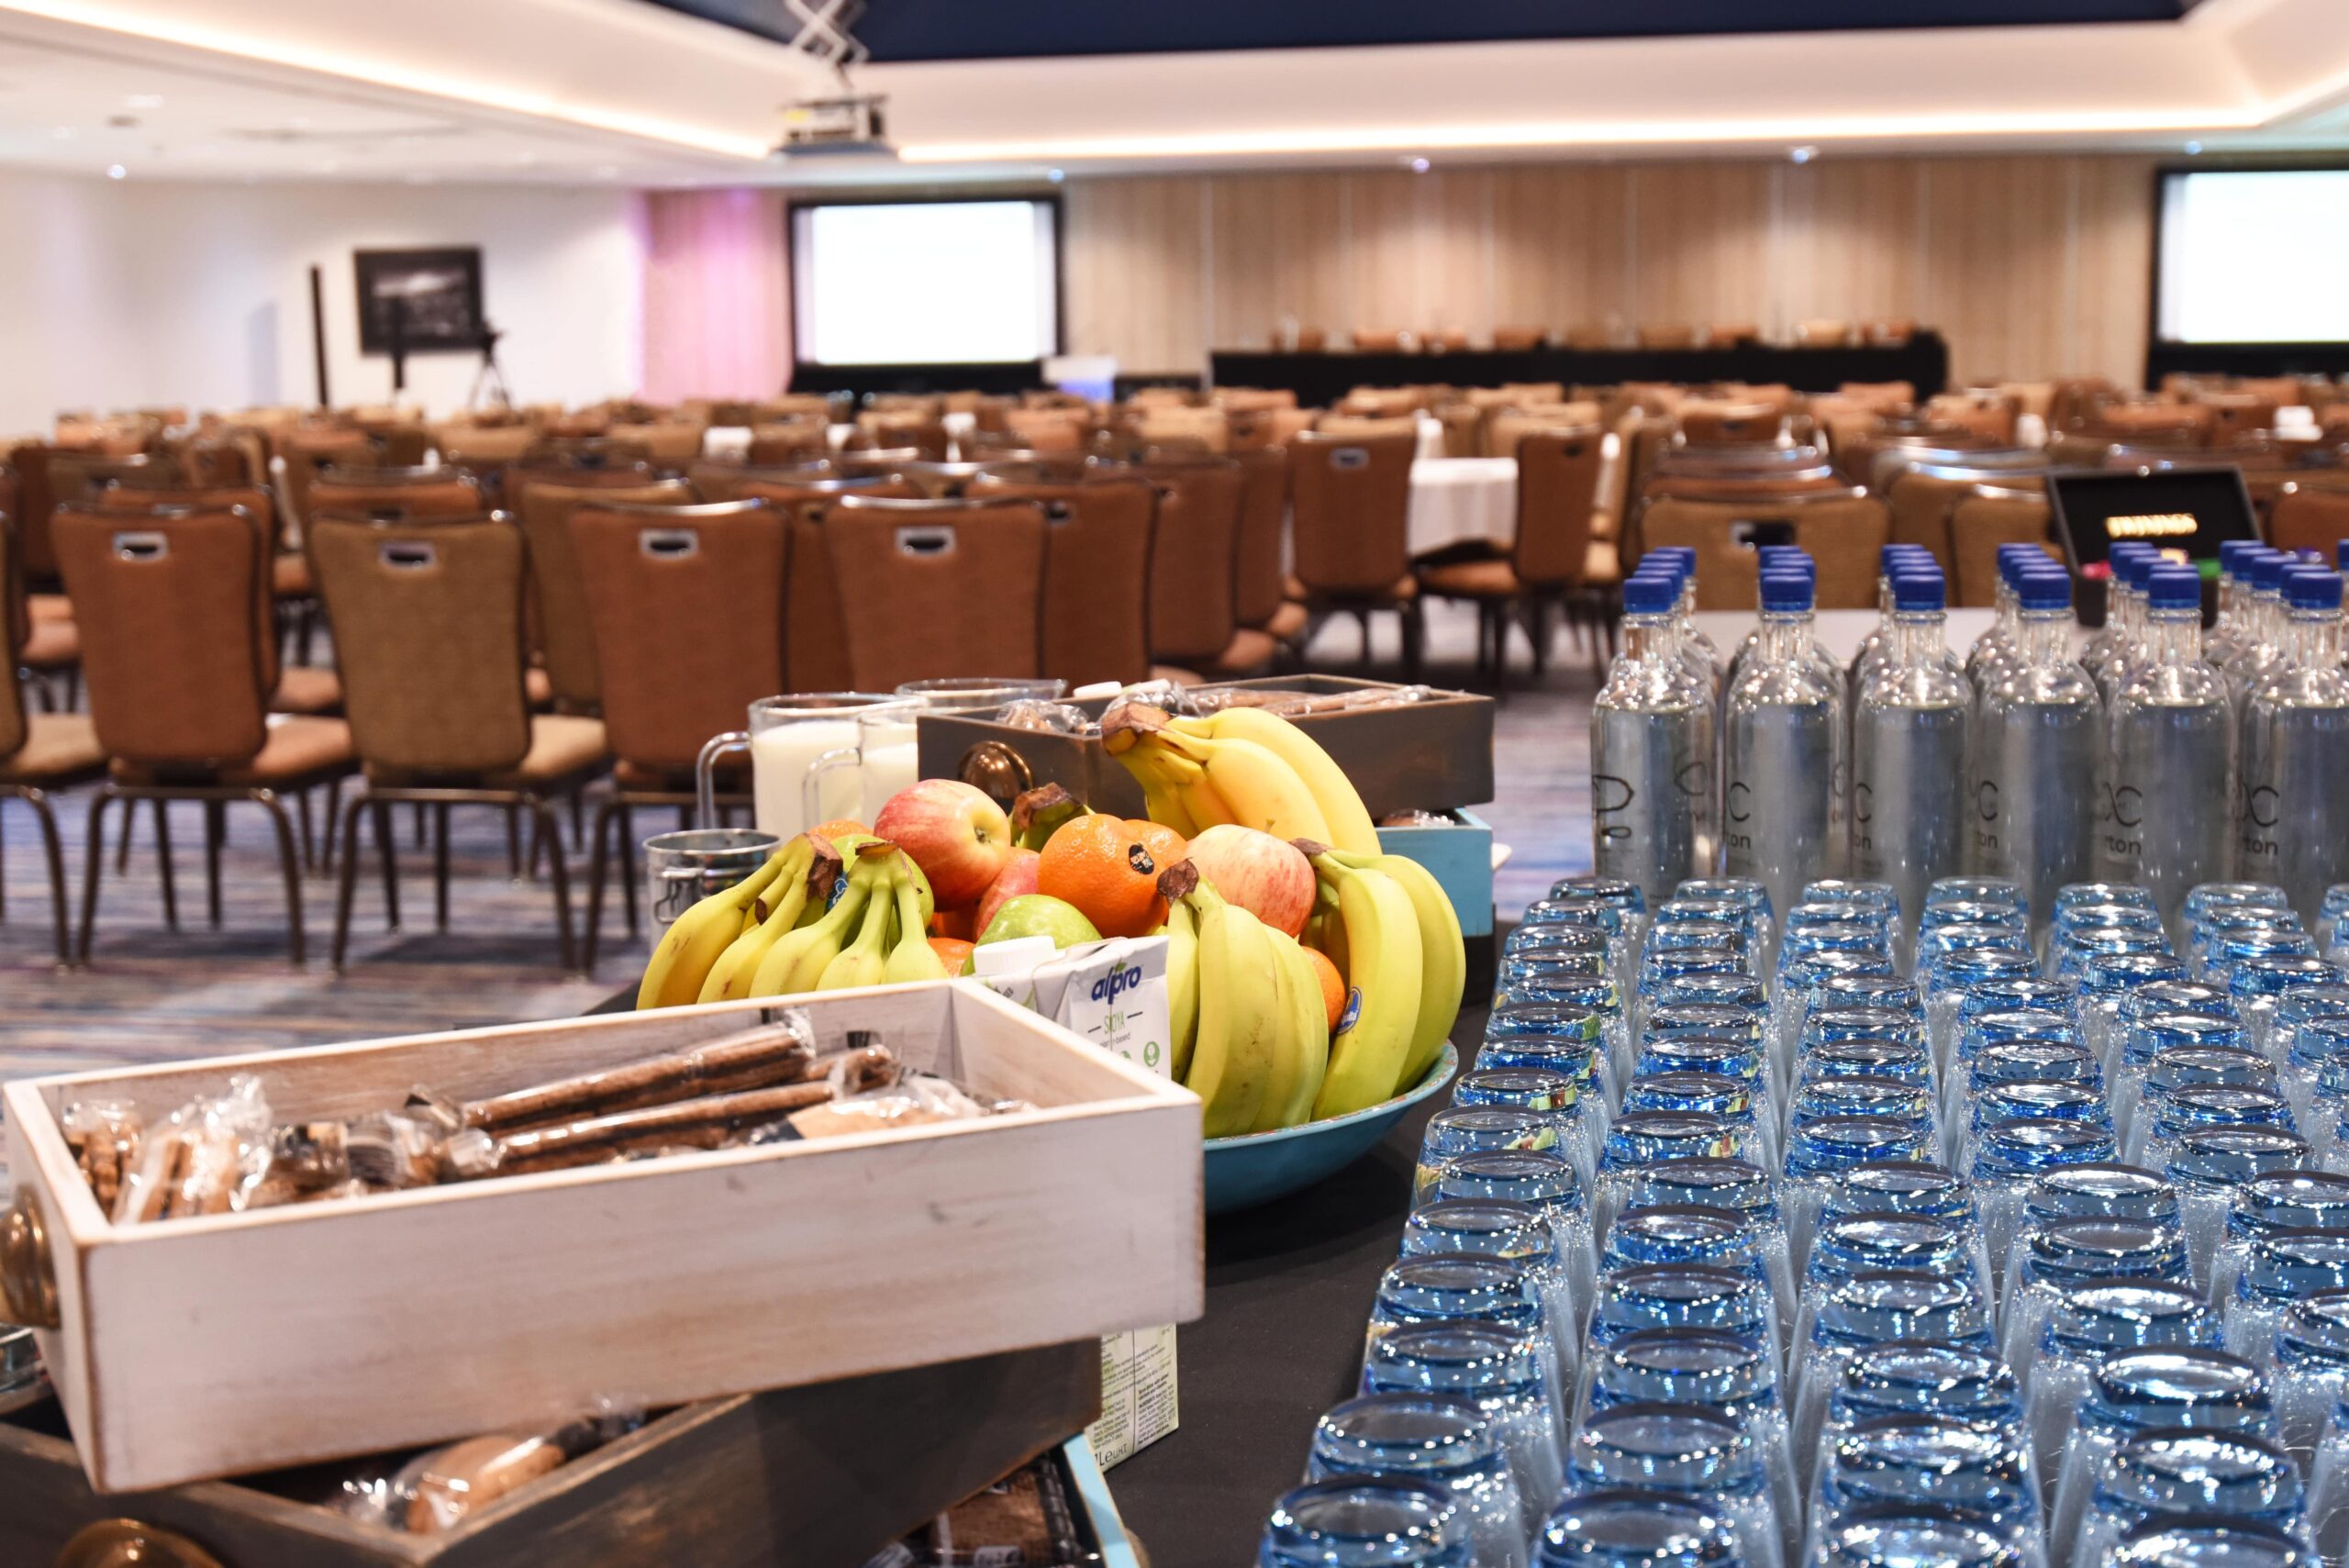 Conference Venue Hire - Conference Catering Services - OEC Sheffield